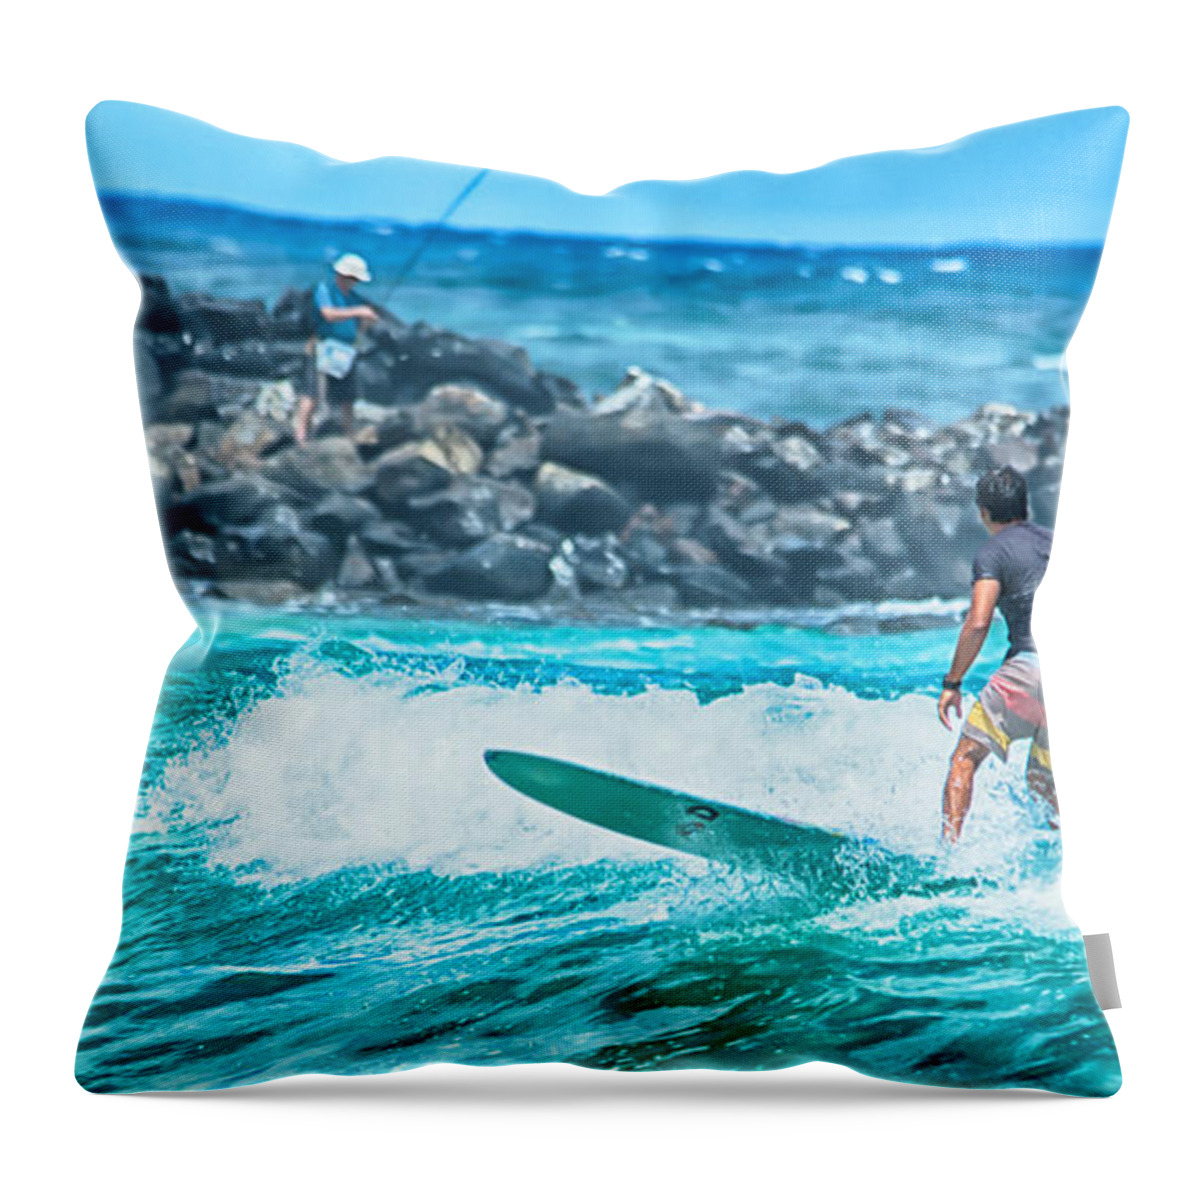 Beach Throw Pillow featuring the photograph Catch Anything? by Eye Olating Images